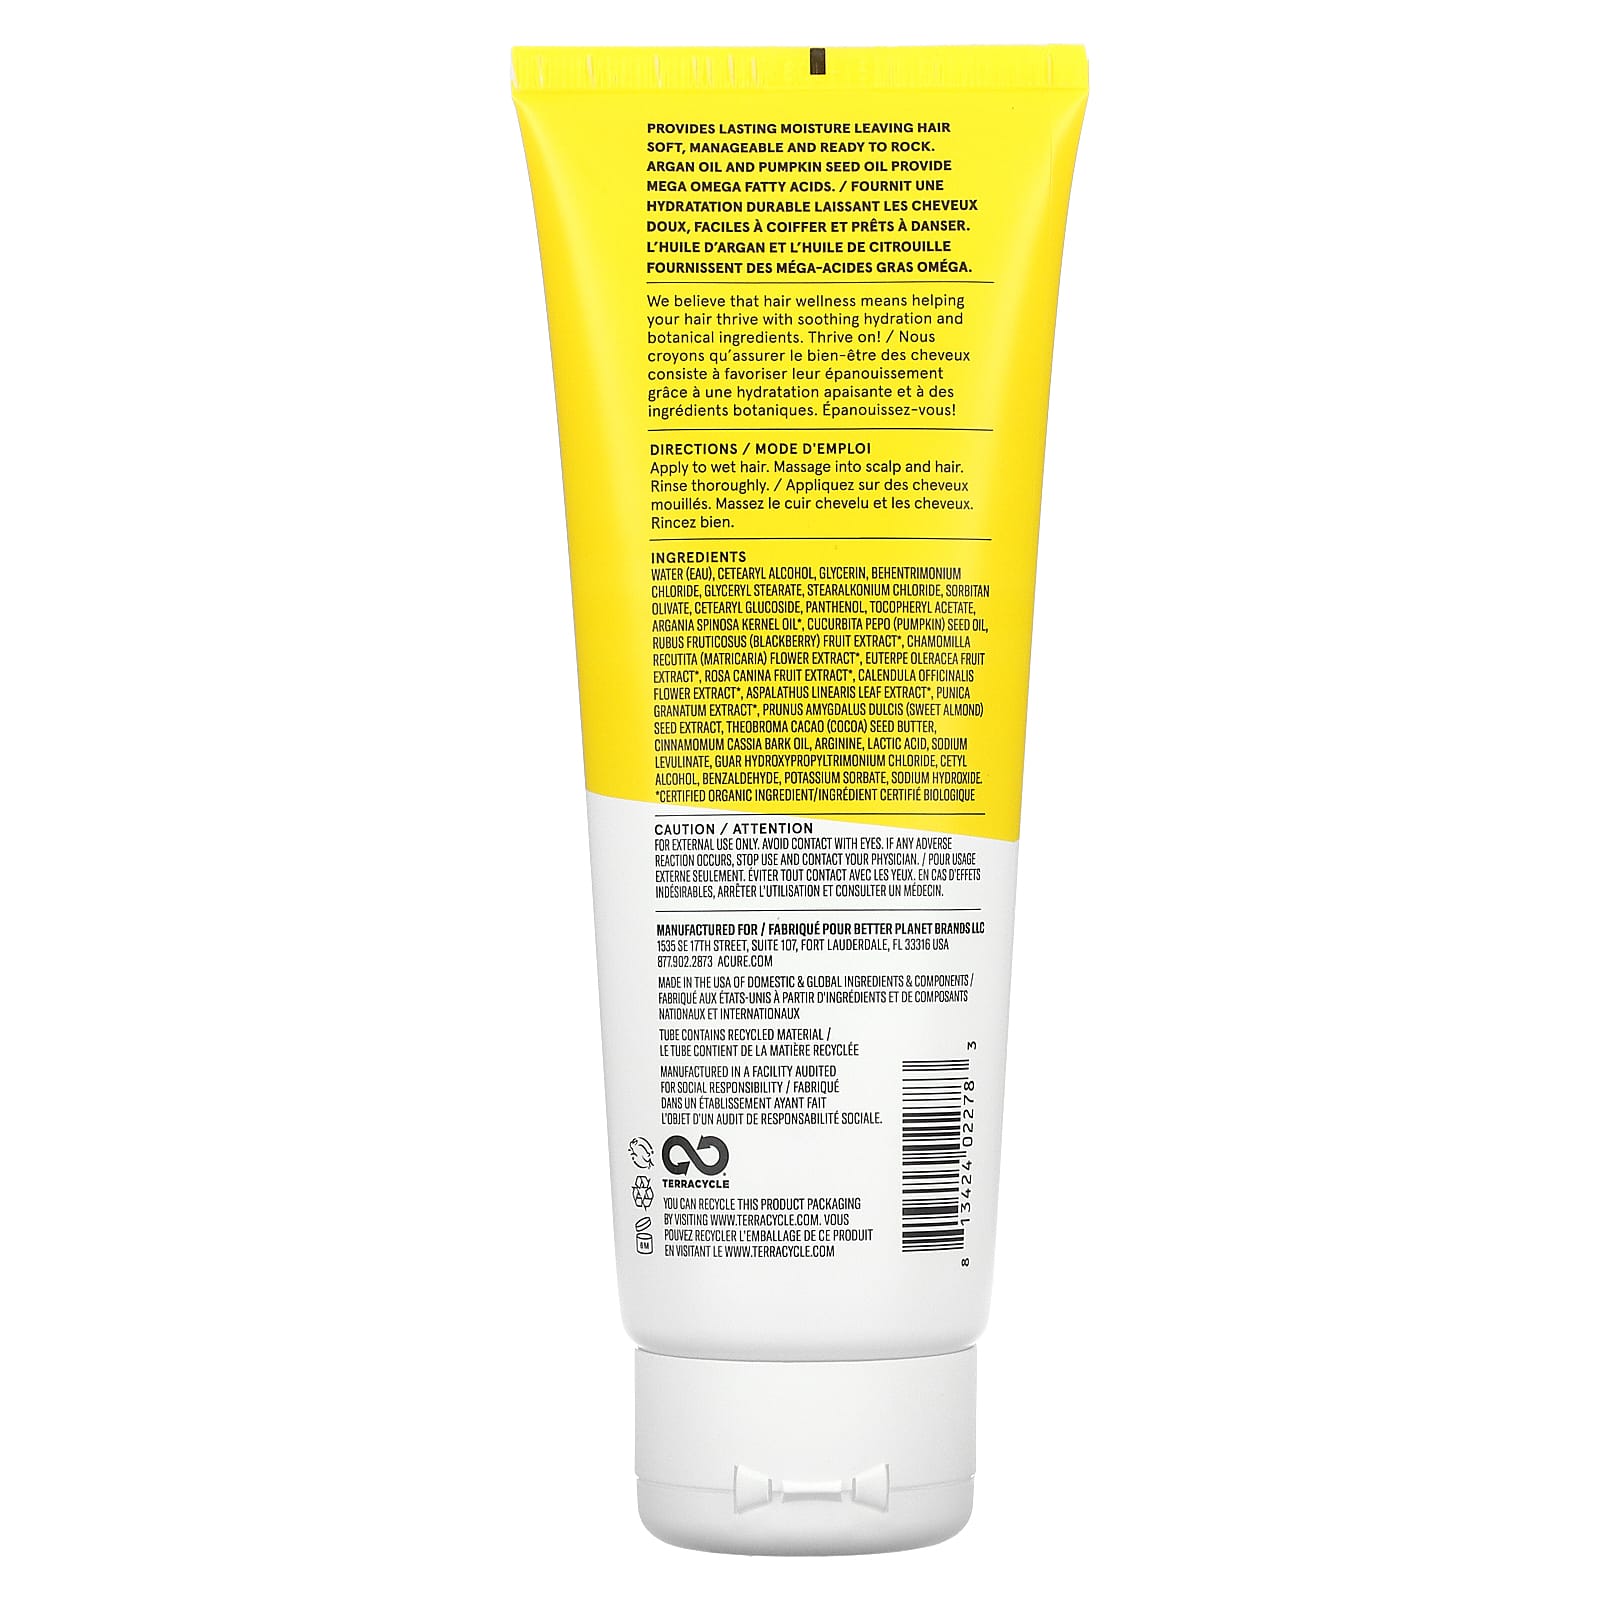 Acure ultra hydrating conditioner reviews